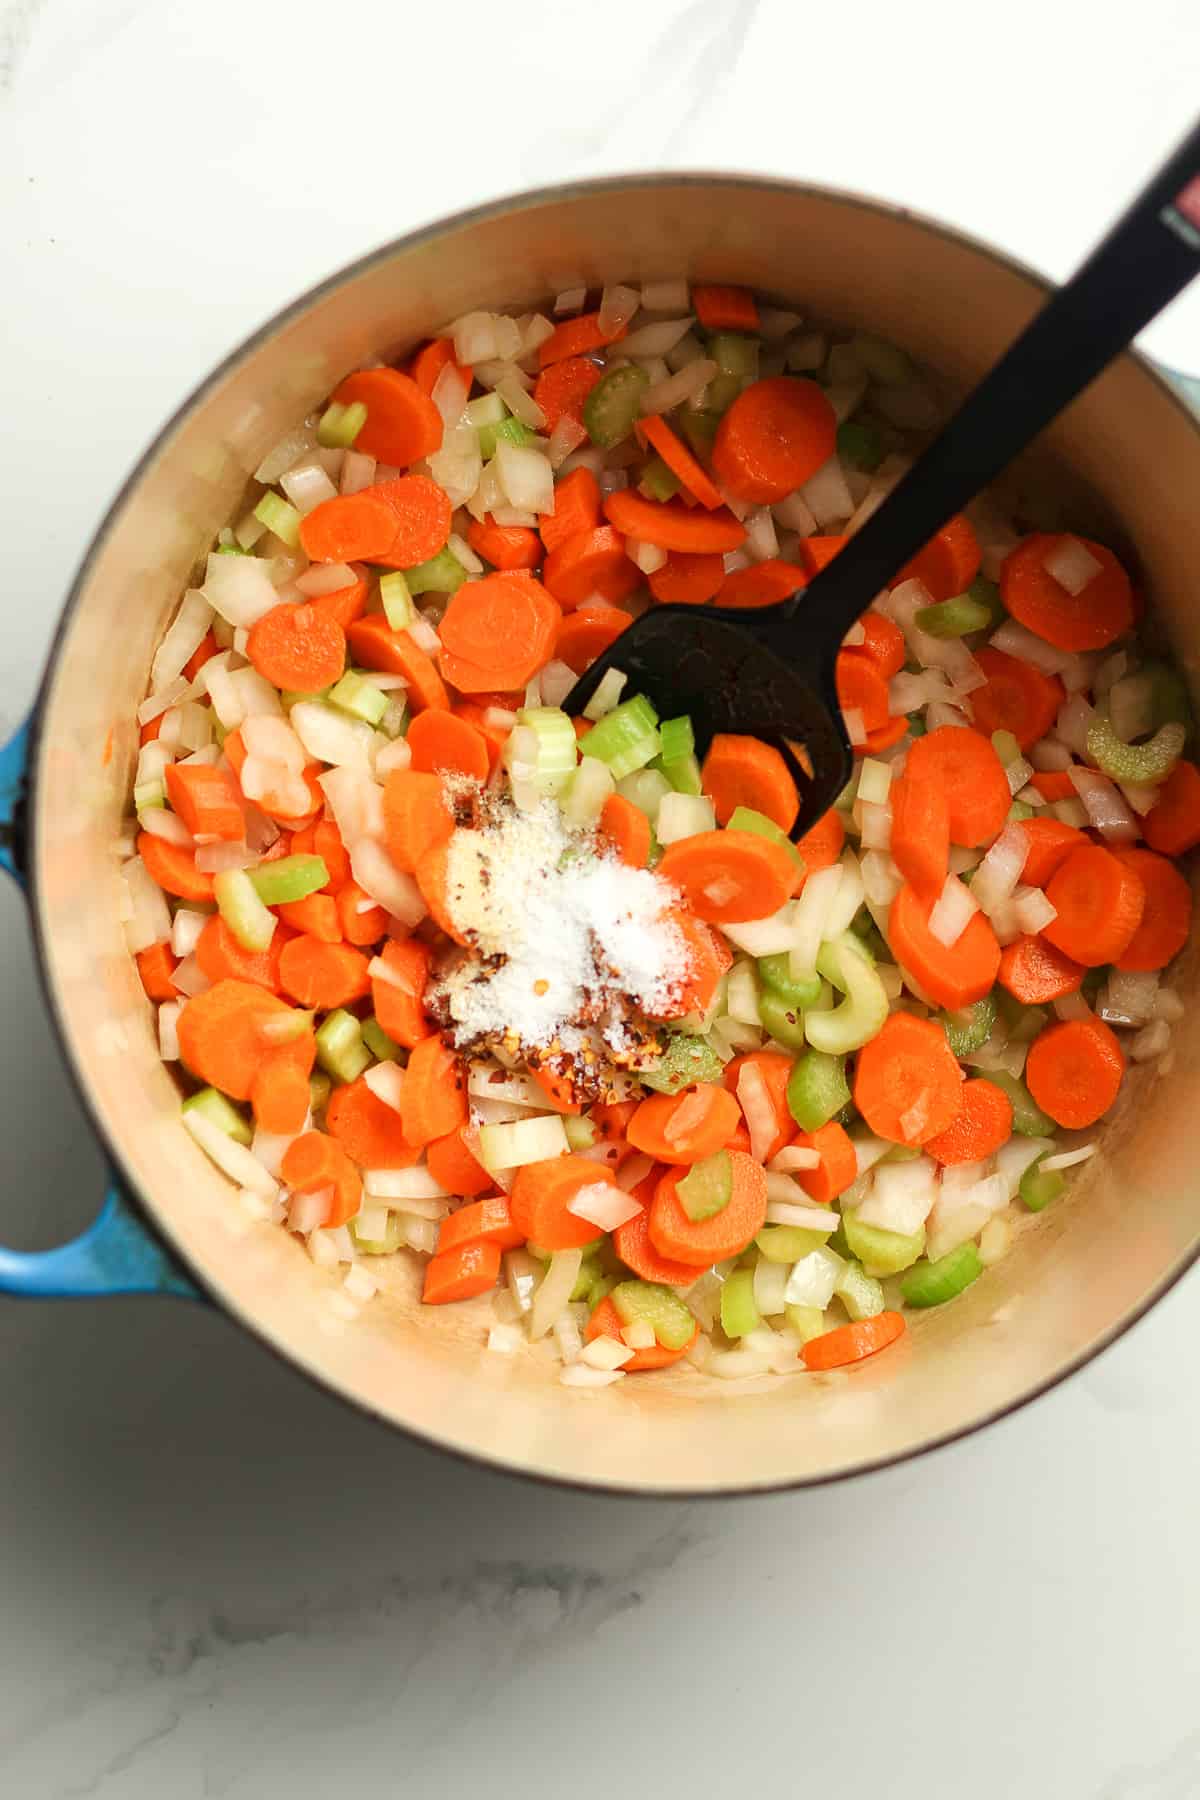 A stock pot of the carrots, onion, celery, and seasonings.